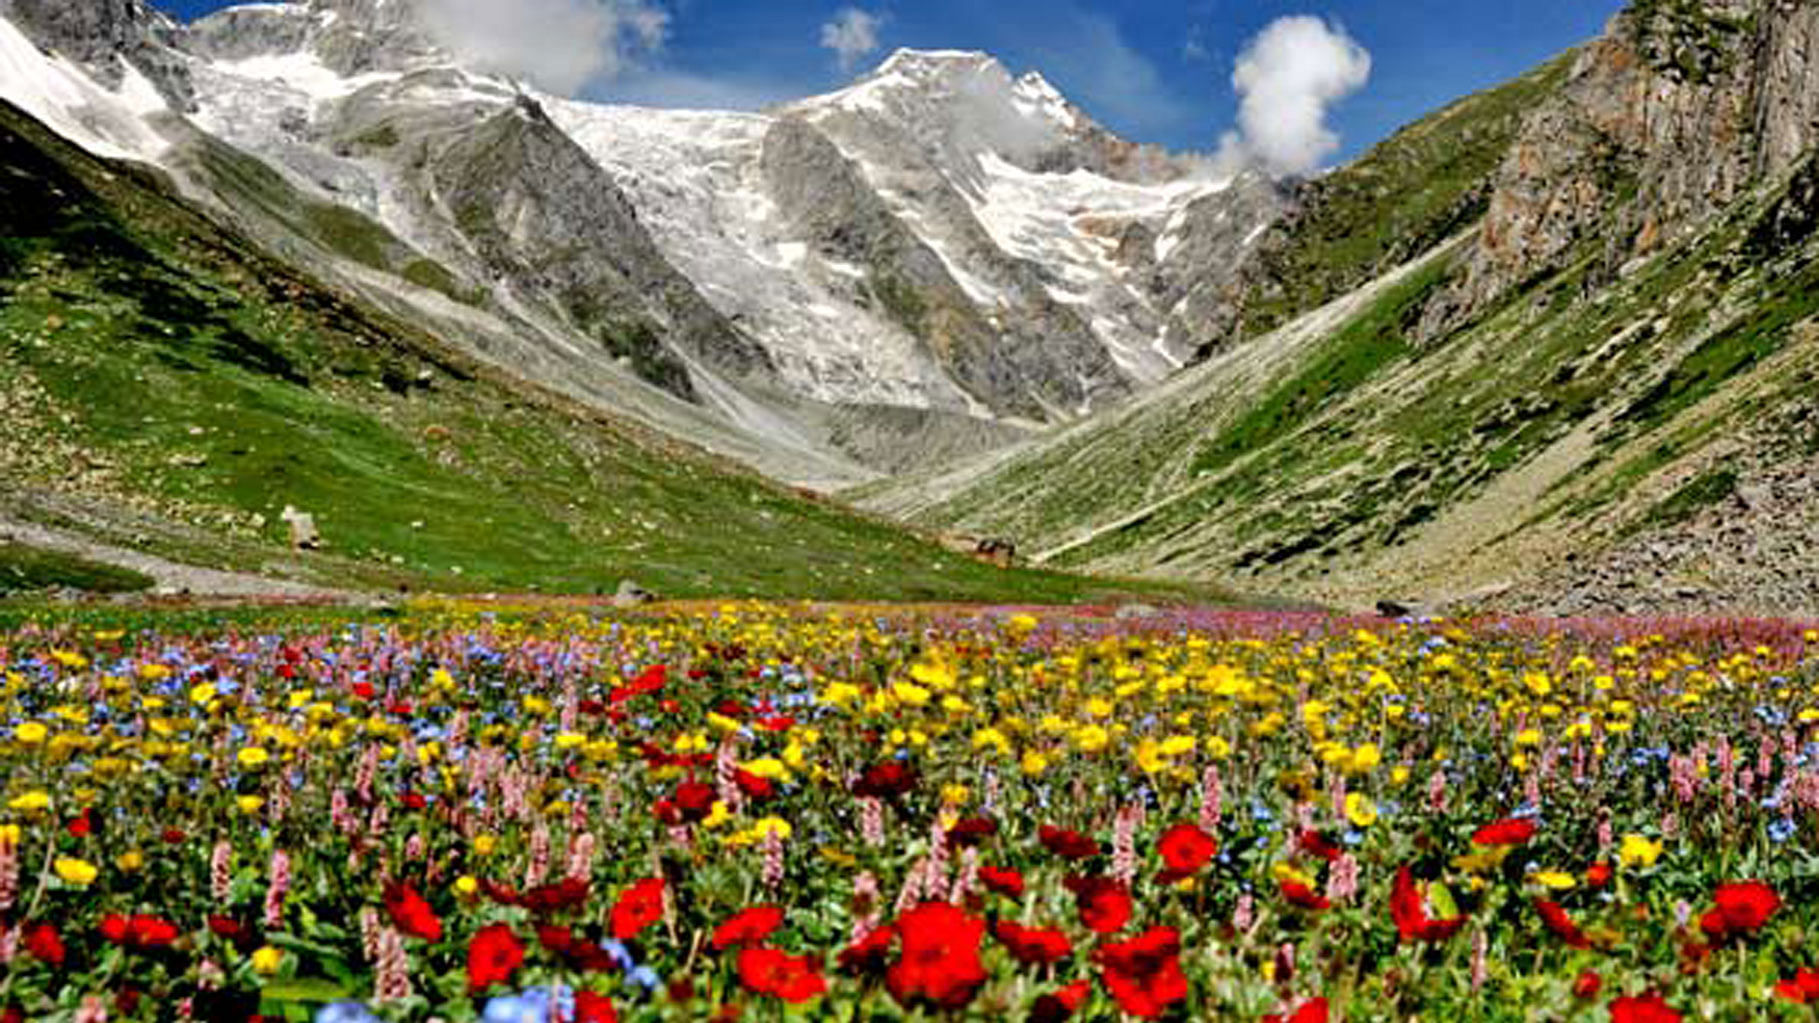 The Valley of Flowers National Park will open to tourists from Wednesday. (Photo Courtesy: <a href="http://www.trekkinginuttarakhand.com/img/valley-of-flowers-trek.jpg">www.trekkinginuttarakhand.com</a>)